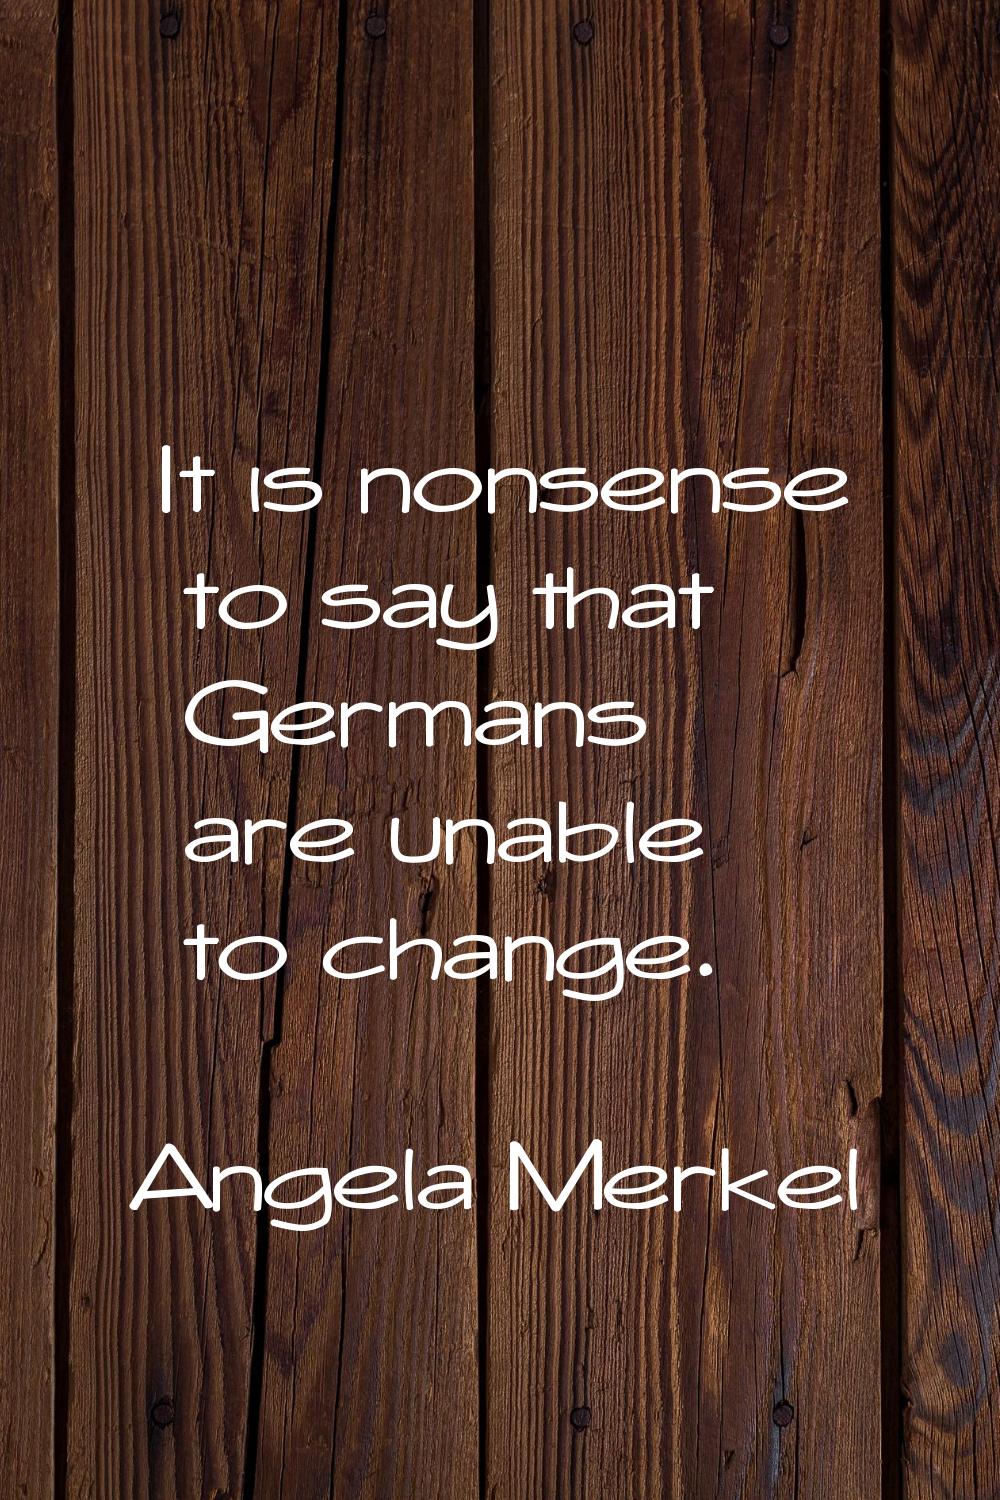 It is nonsense to say that Germans are unable to change.